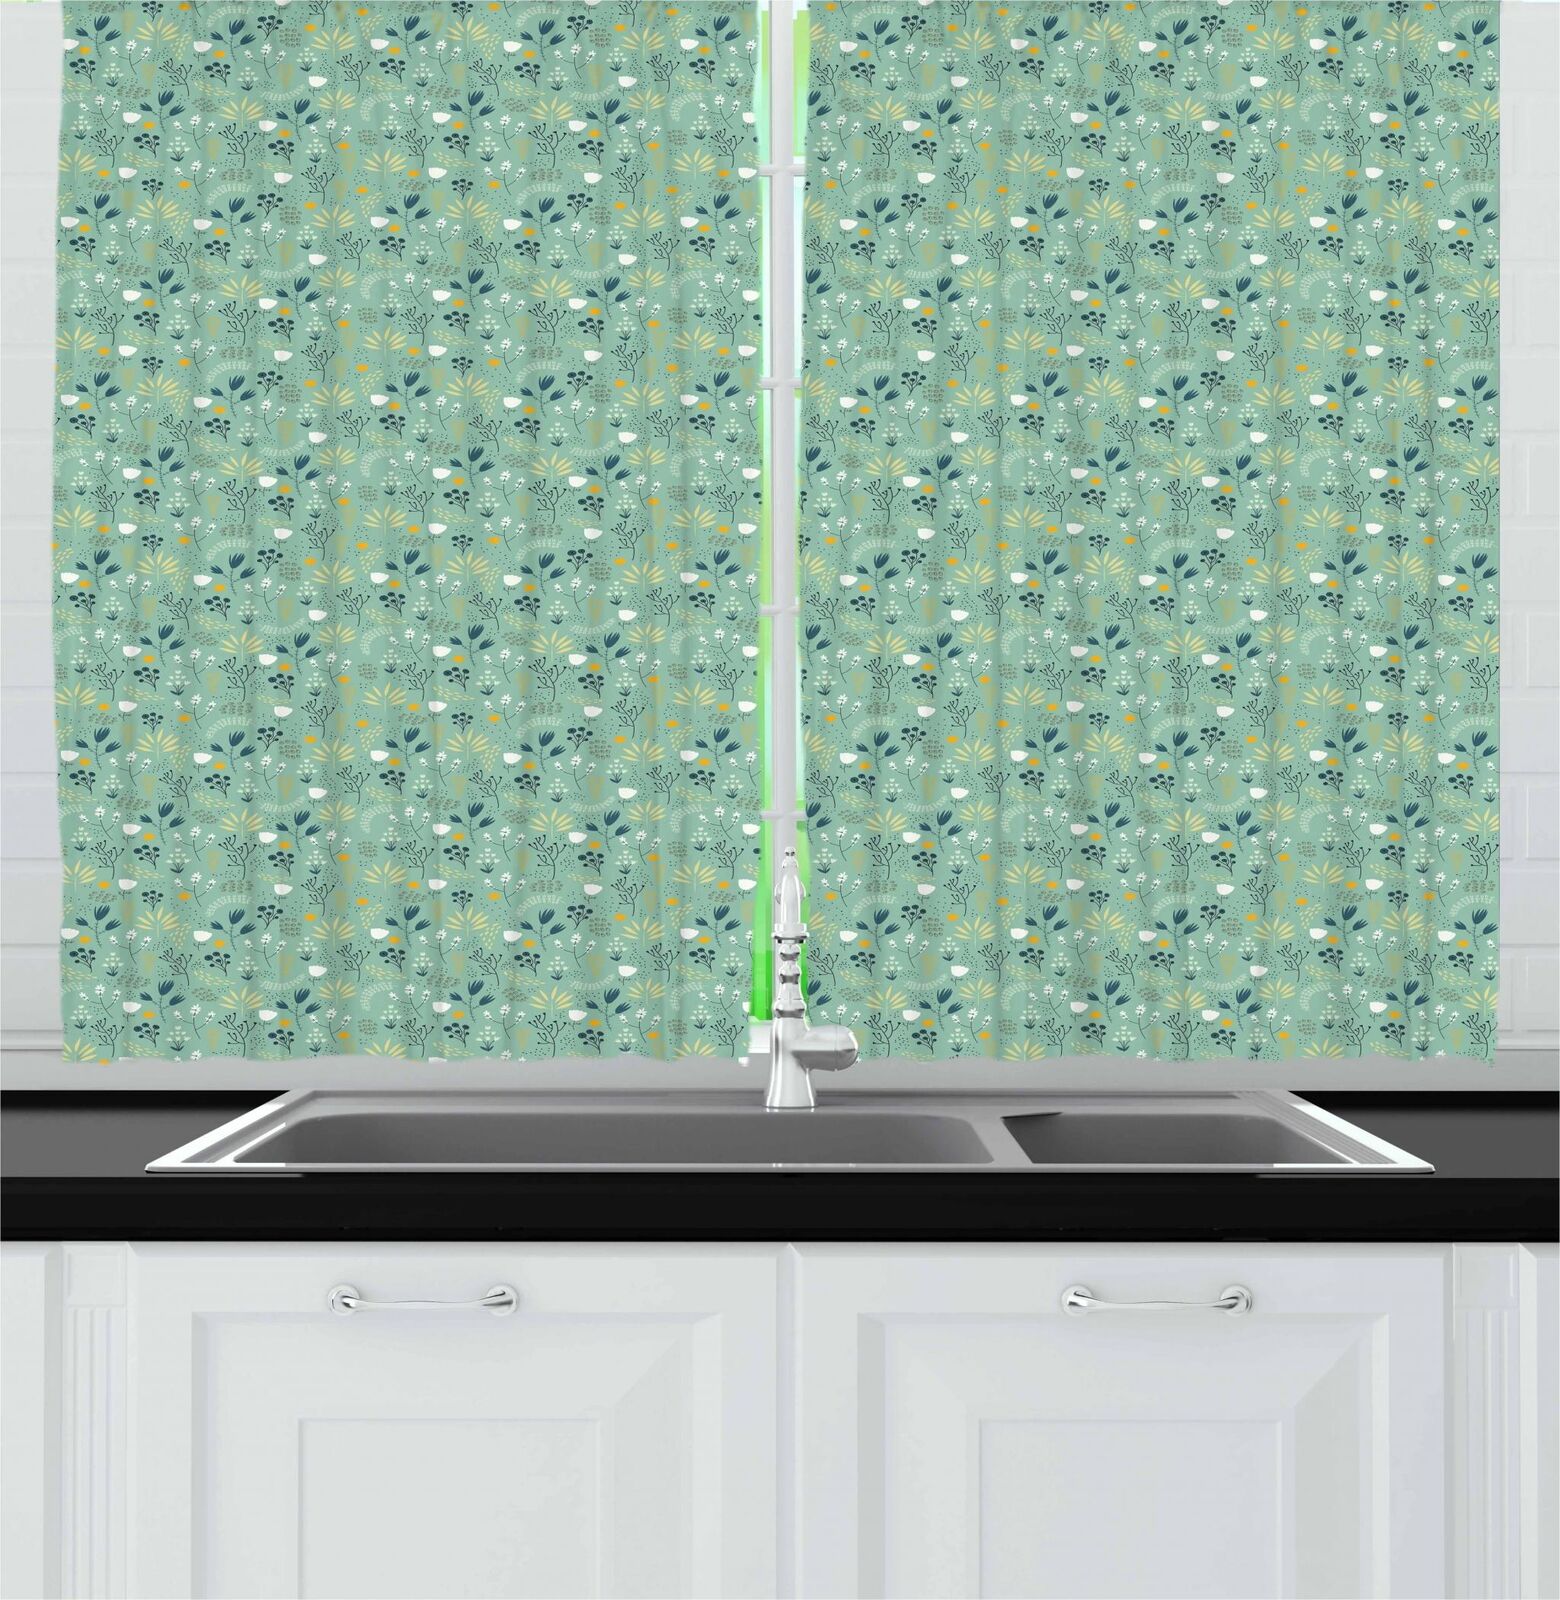 Feminine Garden Kitchen Curtains 2 Panel Set Window Drapes 55" X 39" | Decor Gifts and More